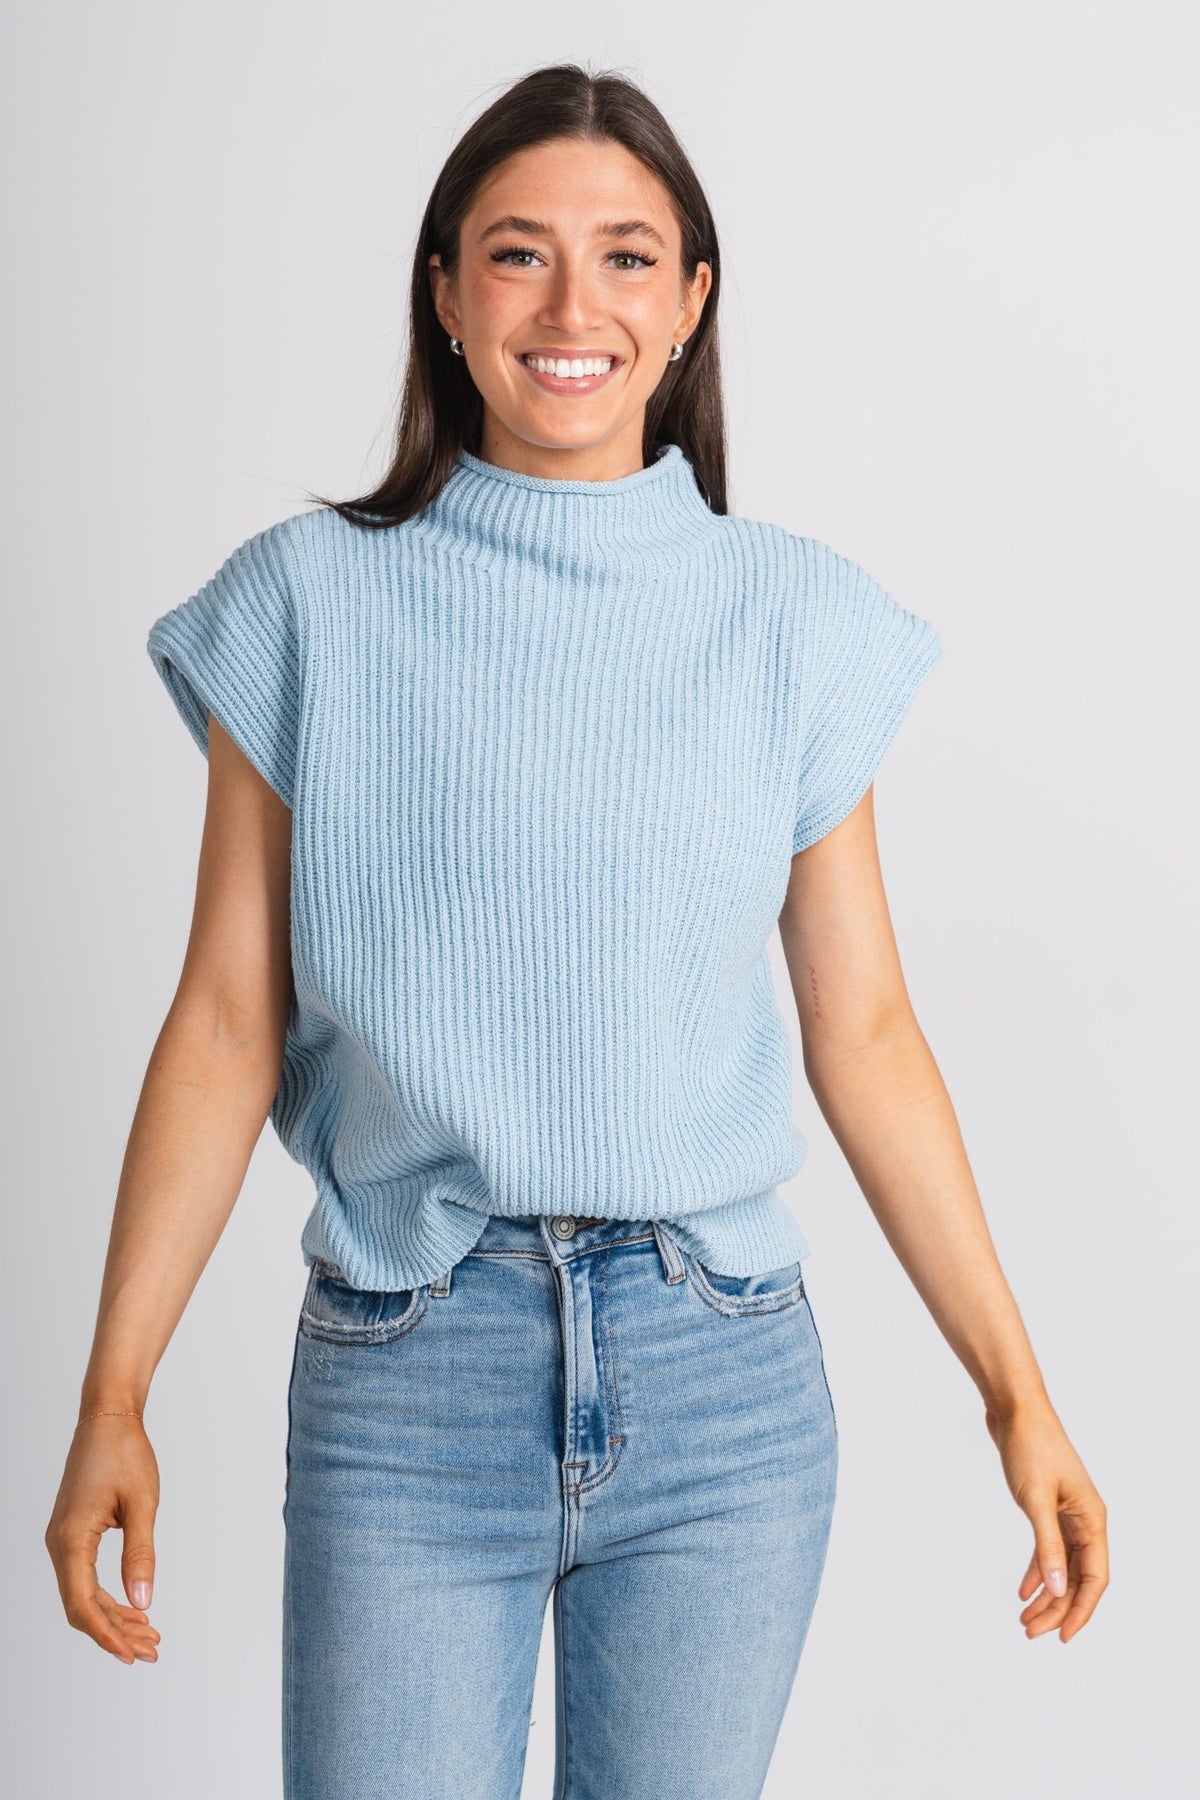 Turtle neck sweater vest top baby blue - Stylish sweater vest - Cute Easter Outfits at Lush Fashion Lounge Boutique in Oklahoma